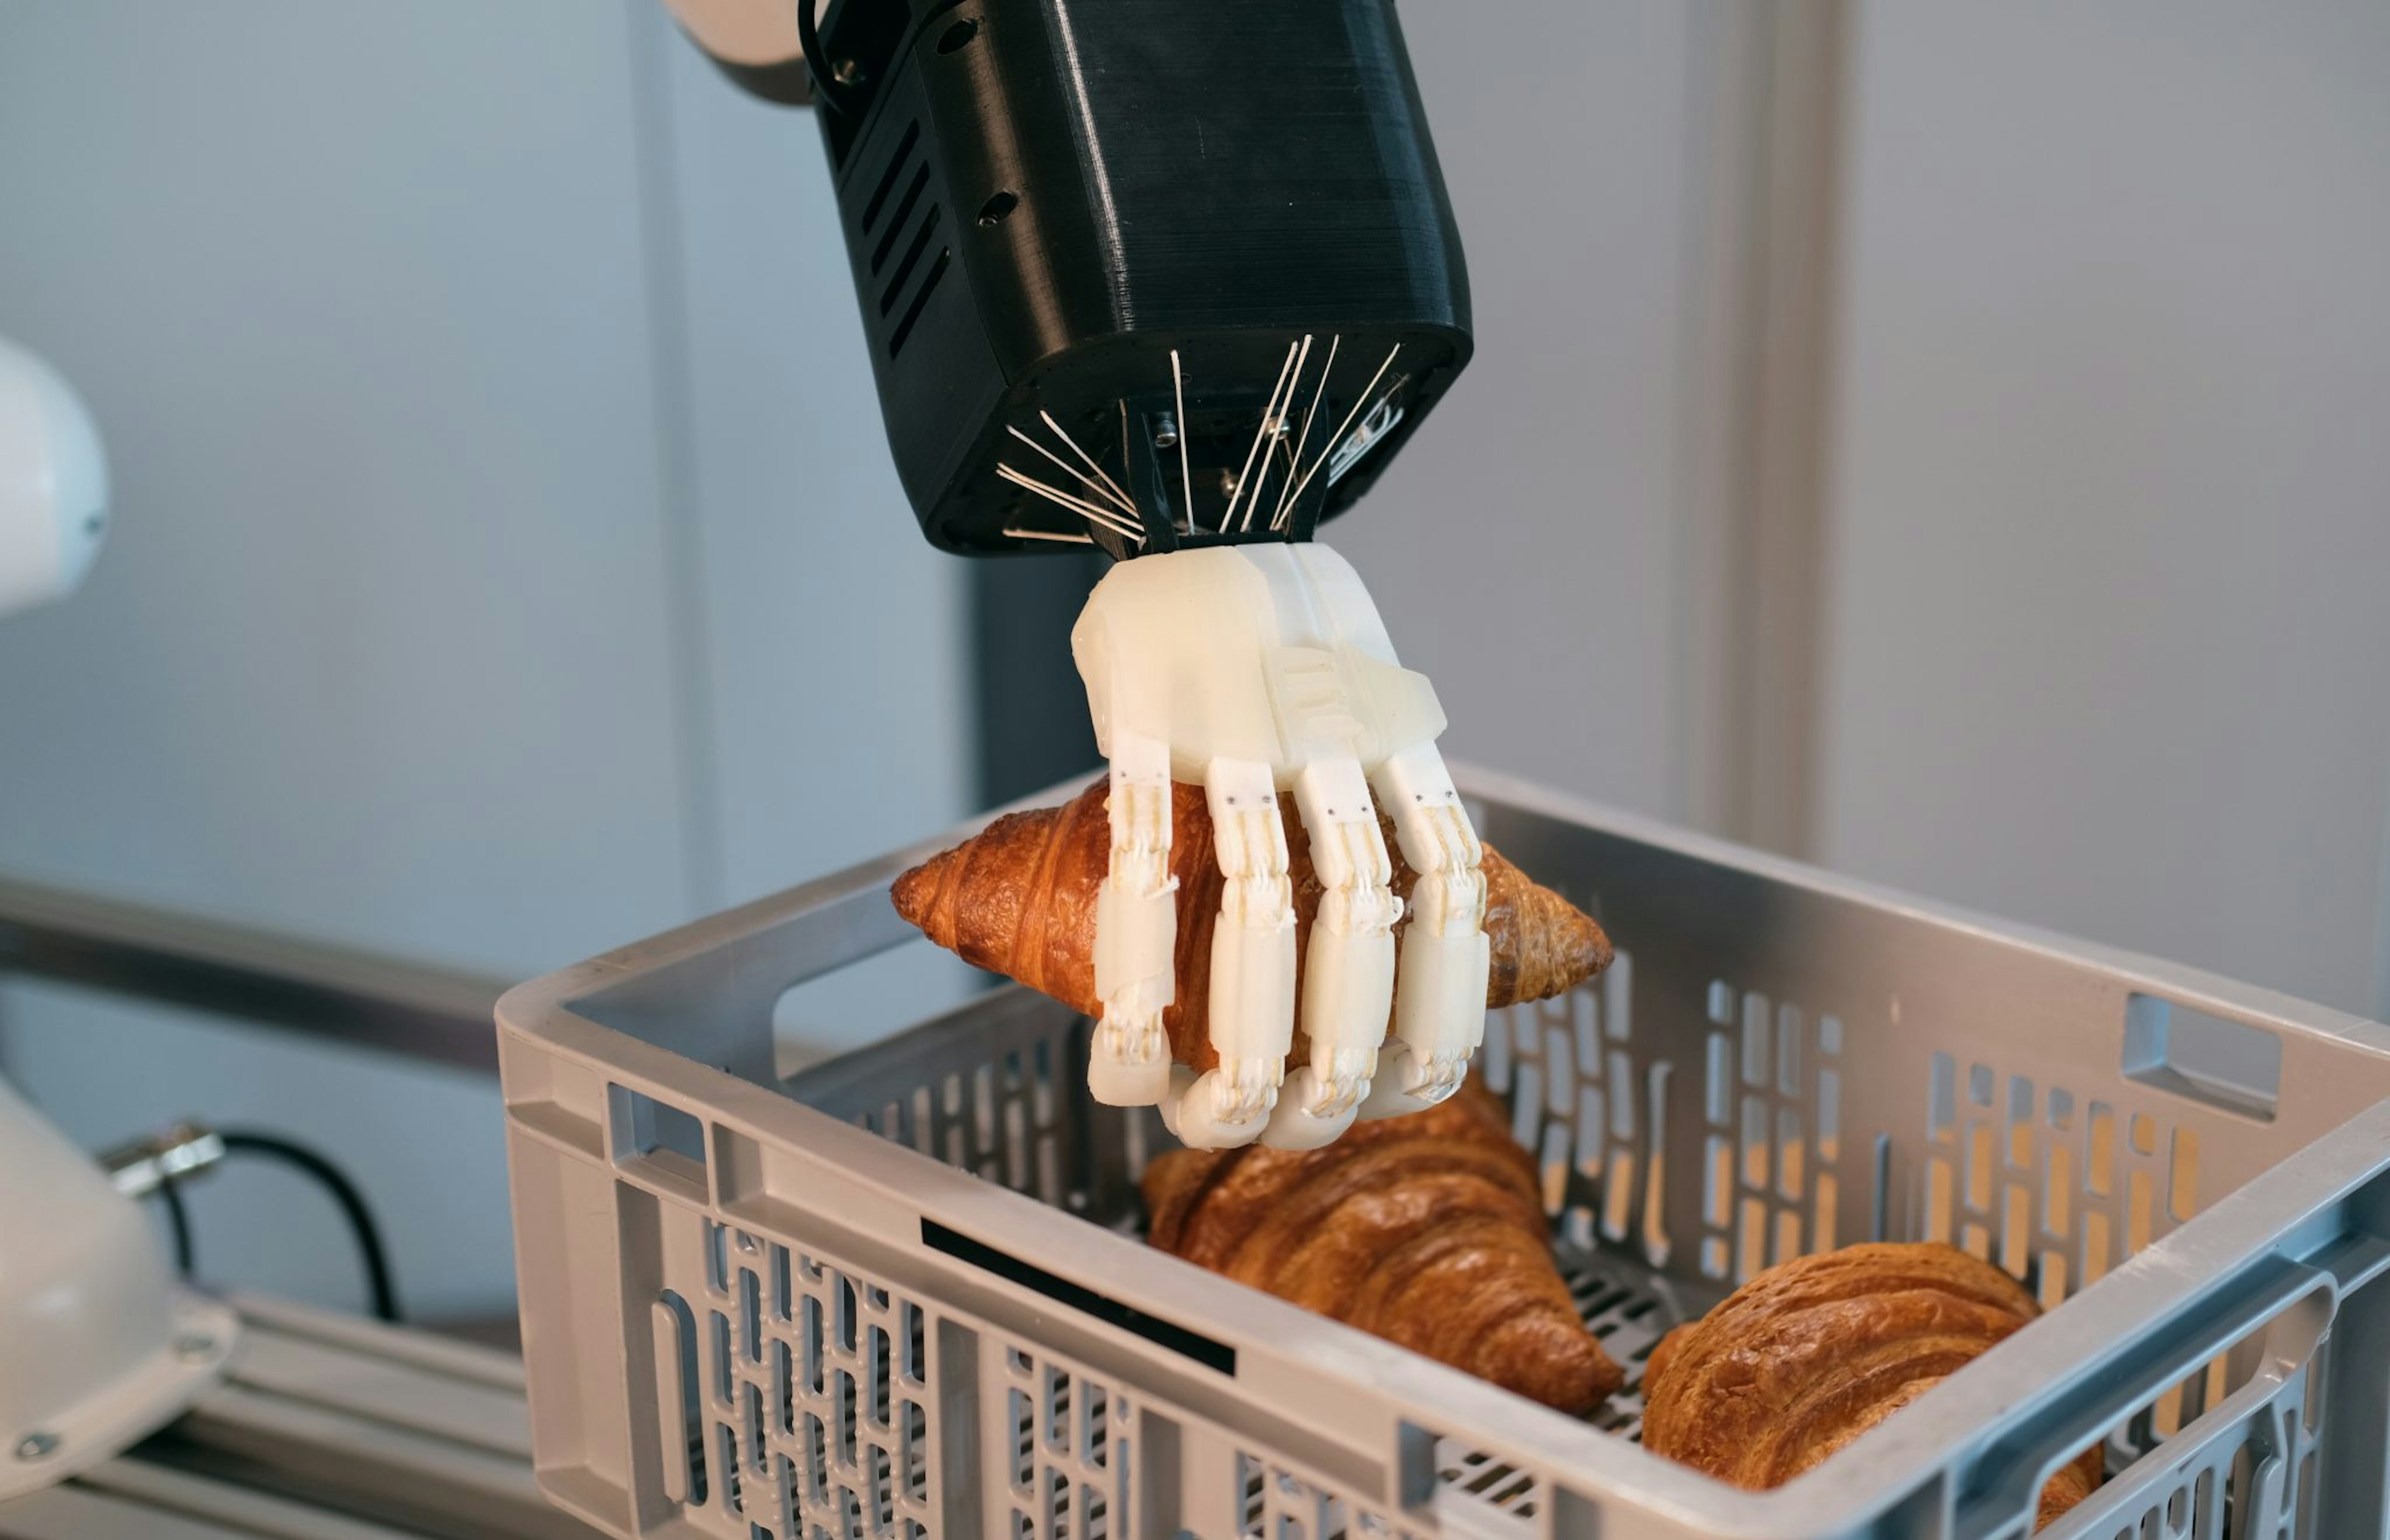 A robotic hand picking up a croissant from a basket.